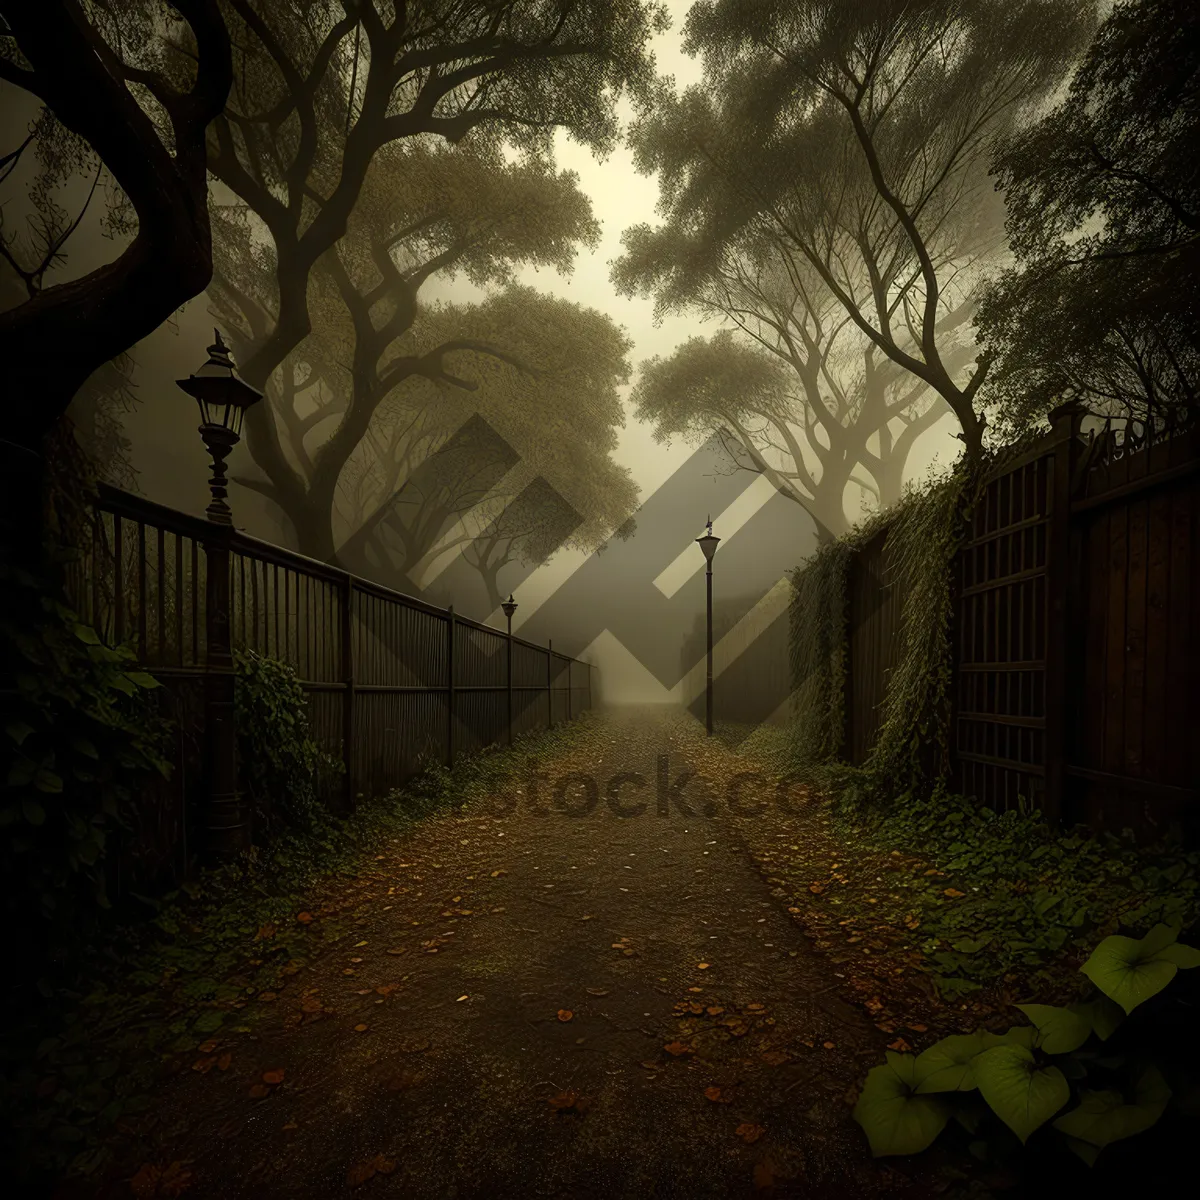 Picture of Autumn Path through Forest: Nature's Barrier of Trees and Fences